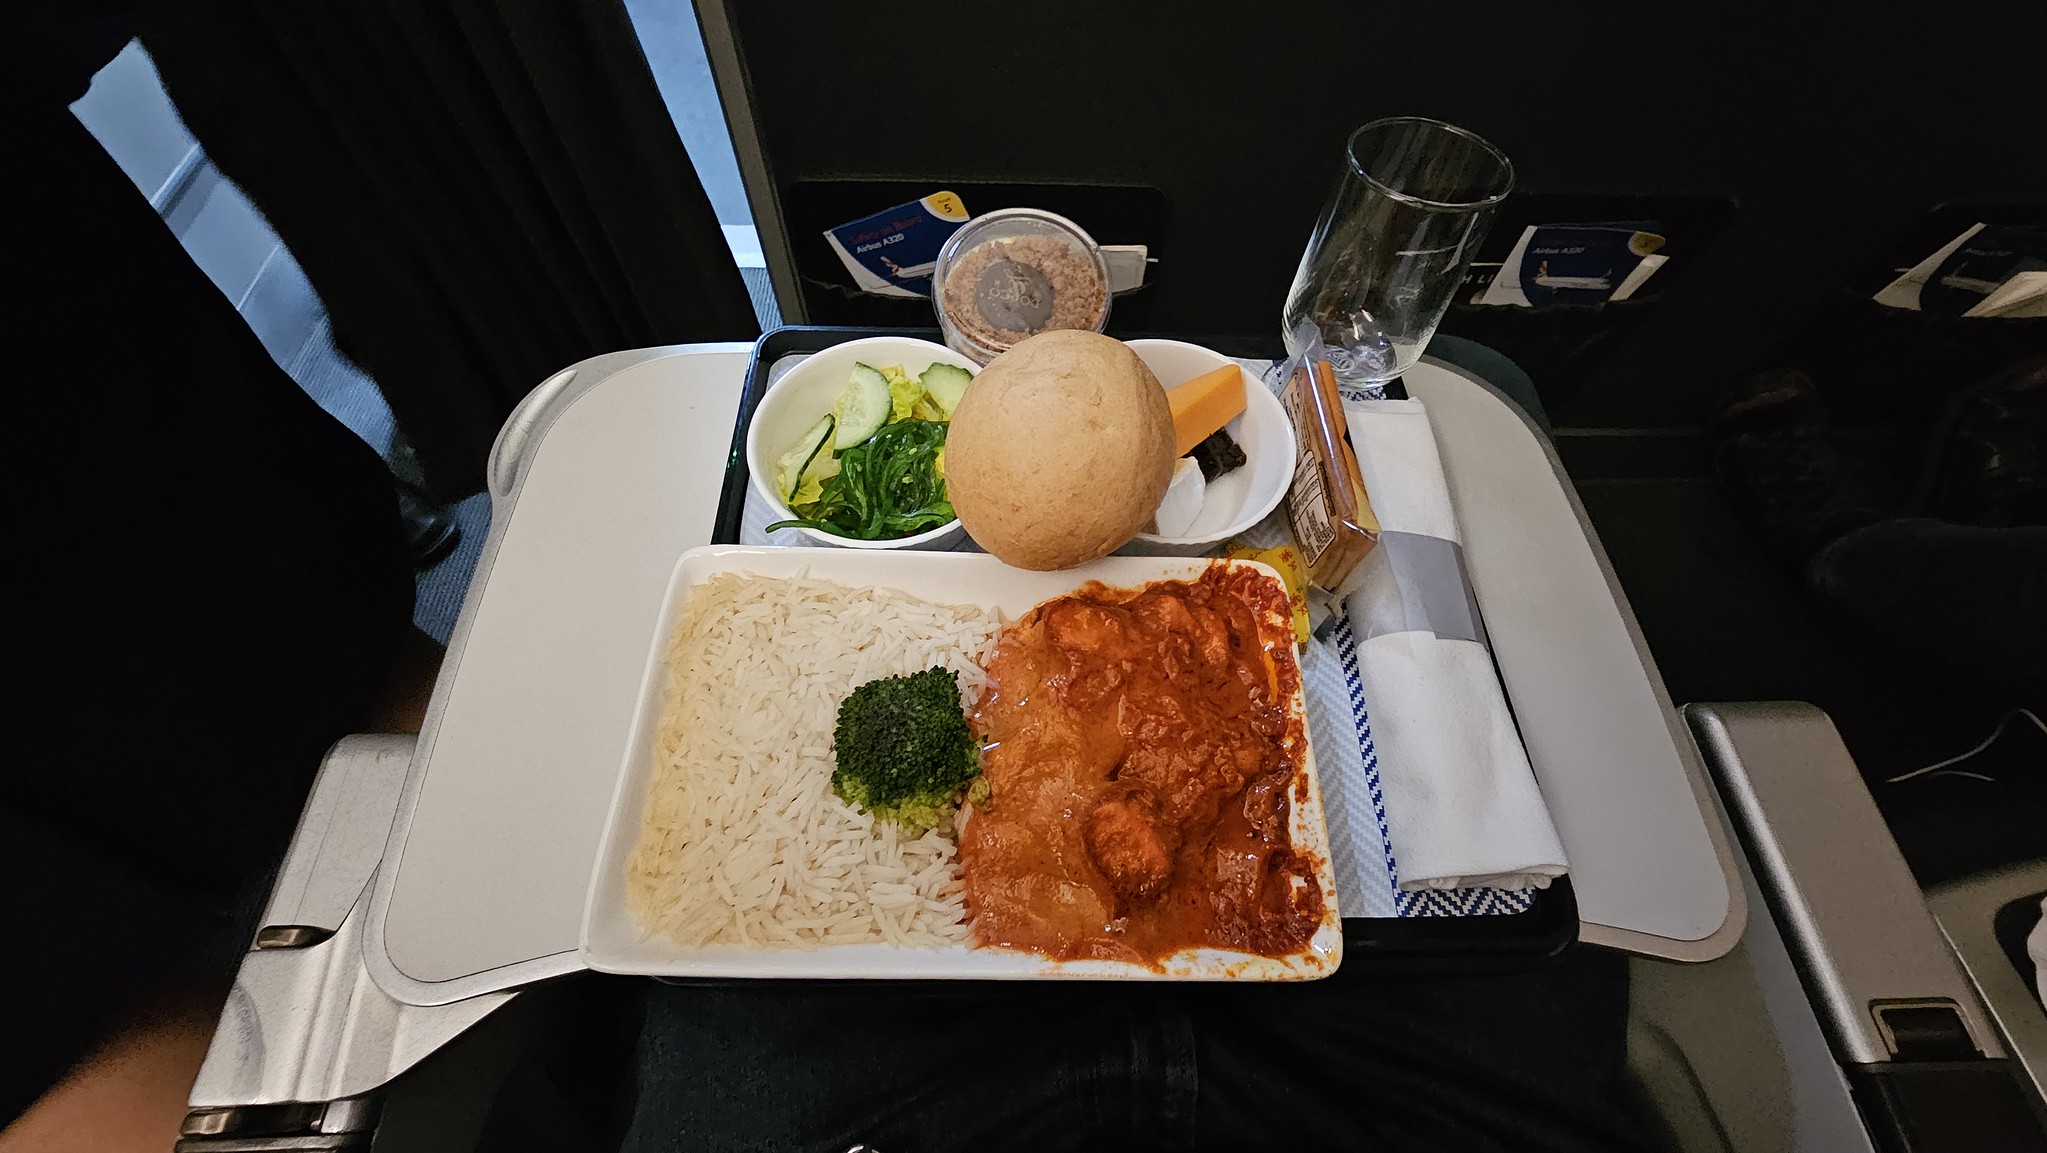 The Ruby curry served on board the BA flight back to Heathrow